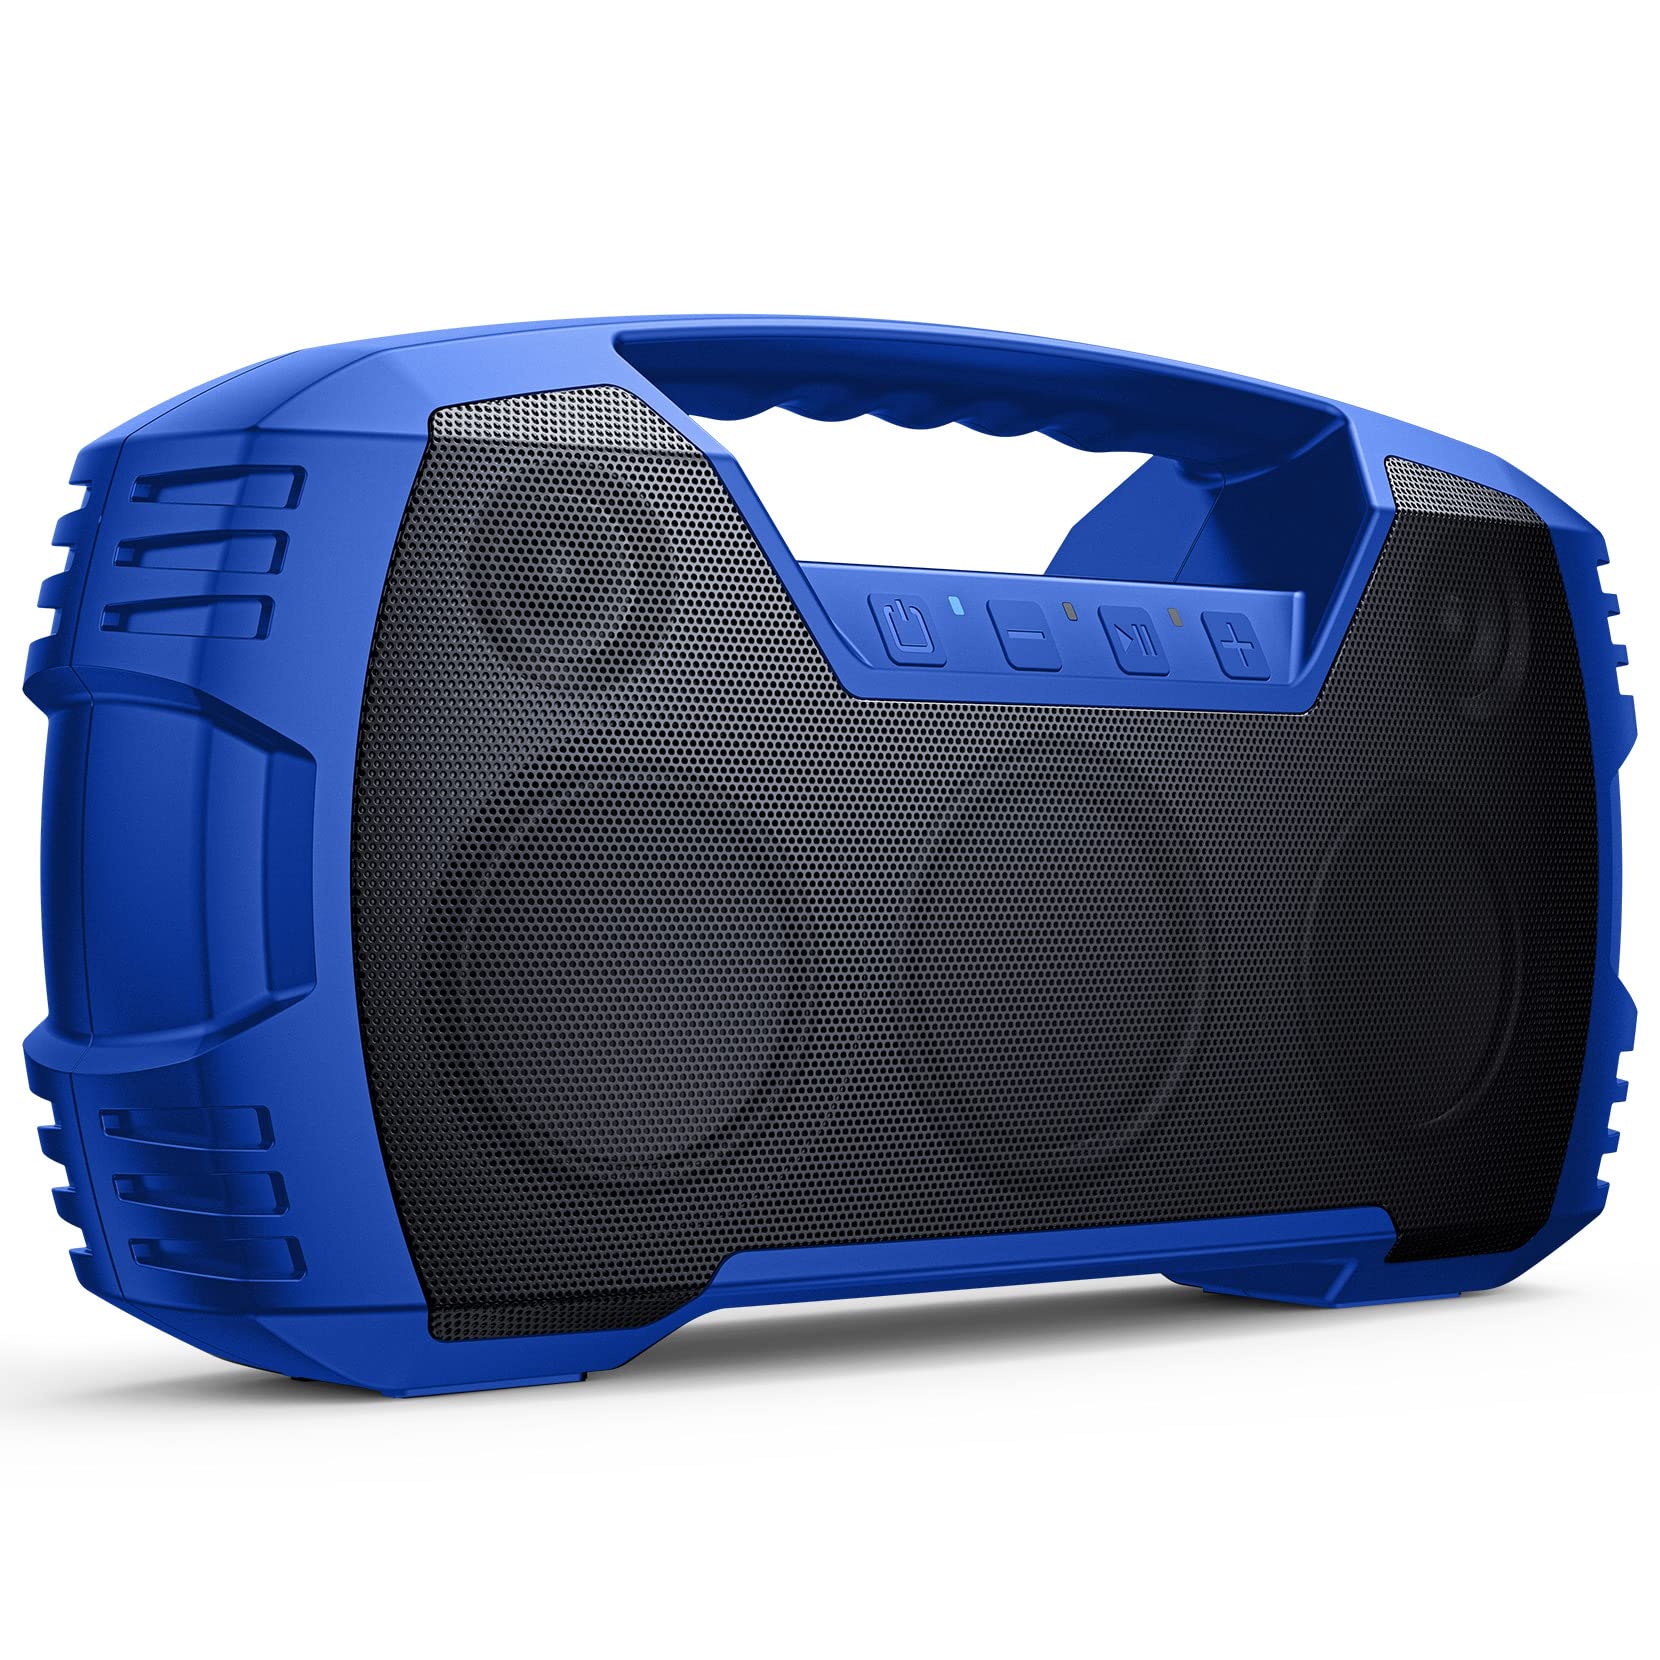 60W (80W Peak) Portable Bluetooth Speaker with Double Subwoofer